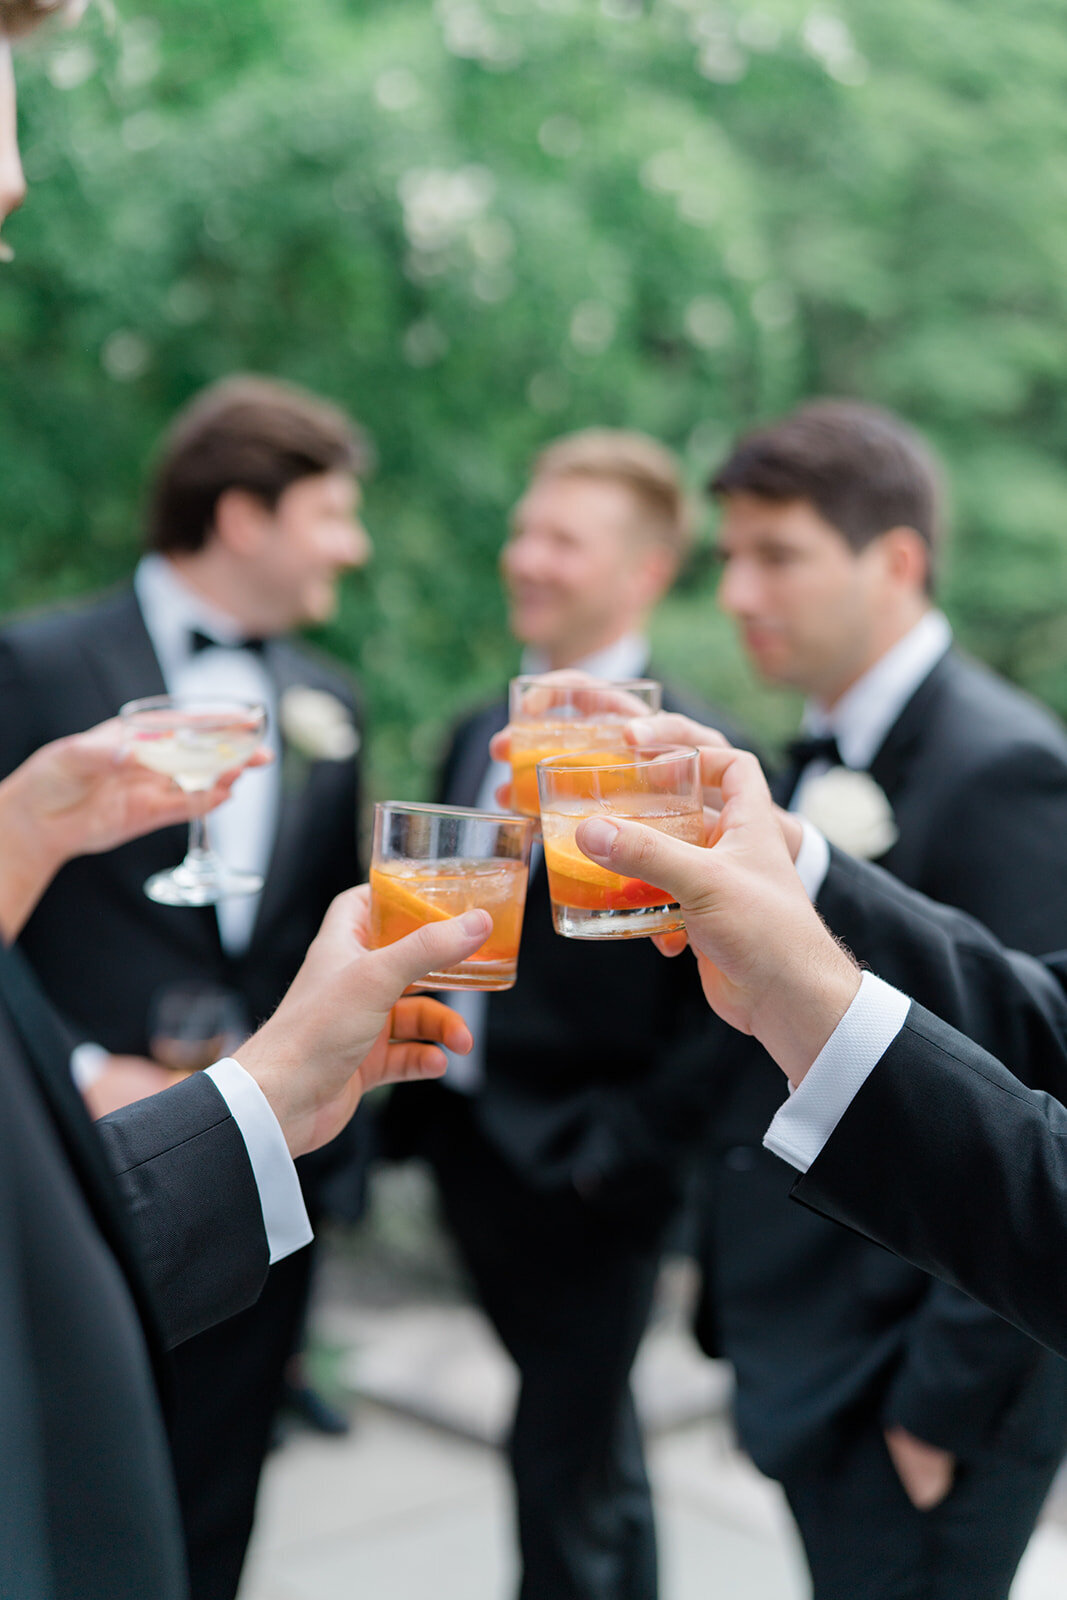 Cocktail hour at the Bradley Estate. Groomsmen grab old fashioneds and toast to the bride and groom.